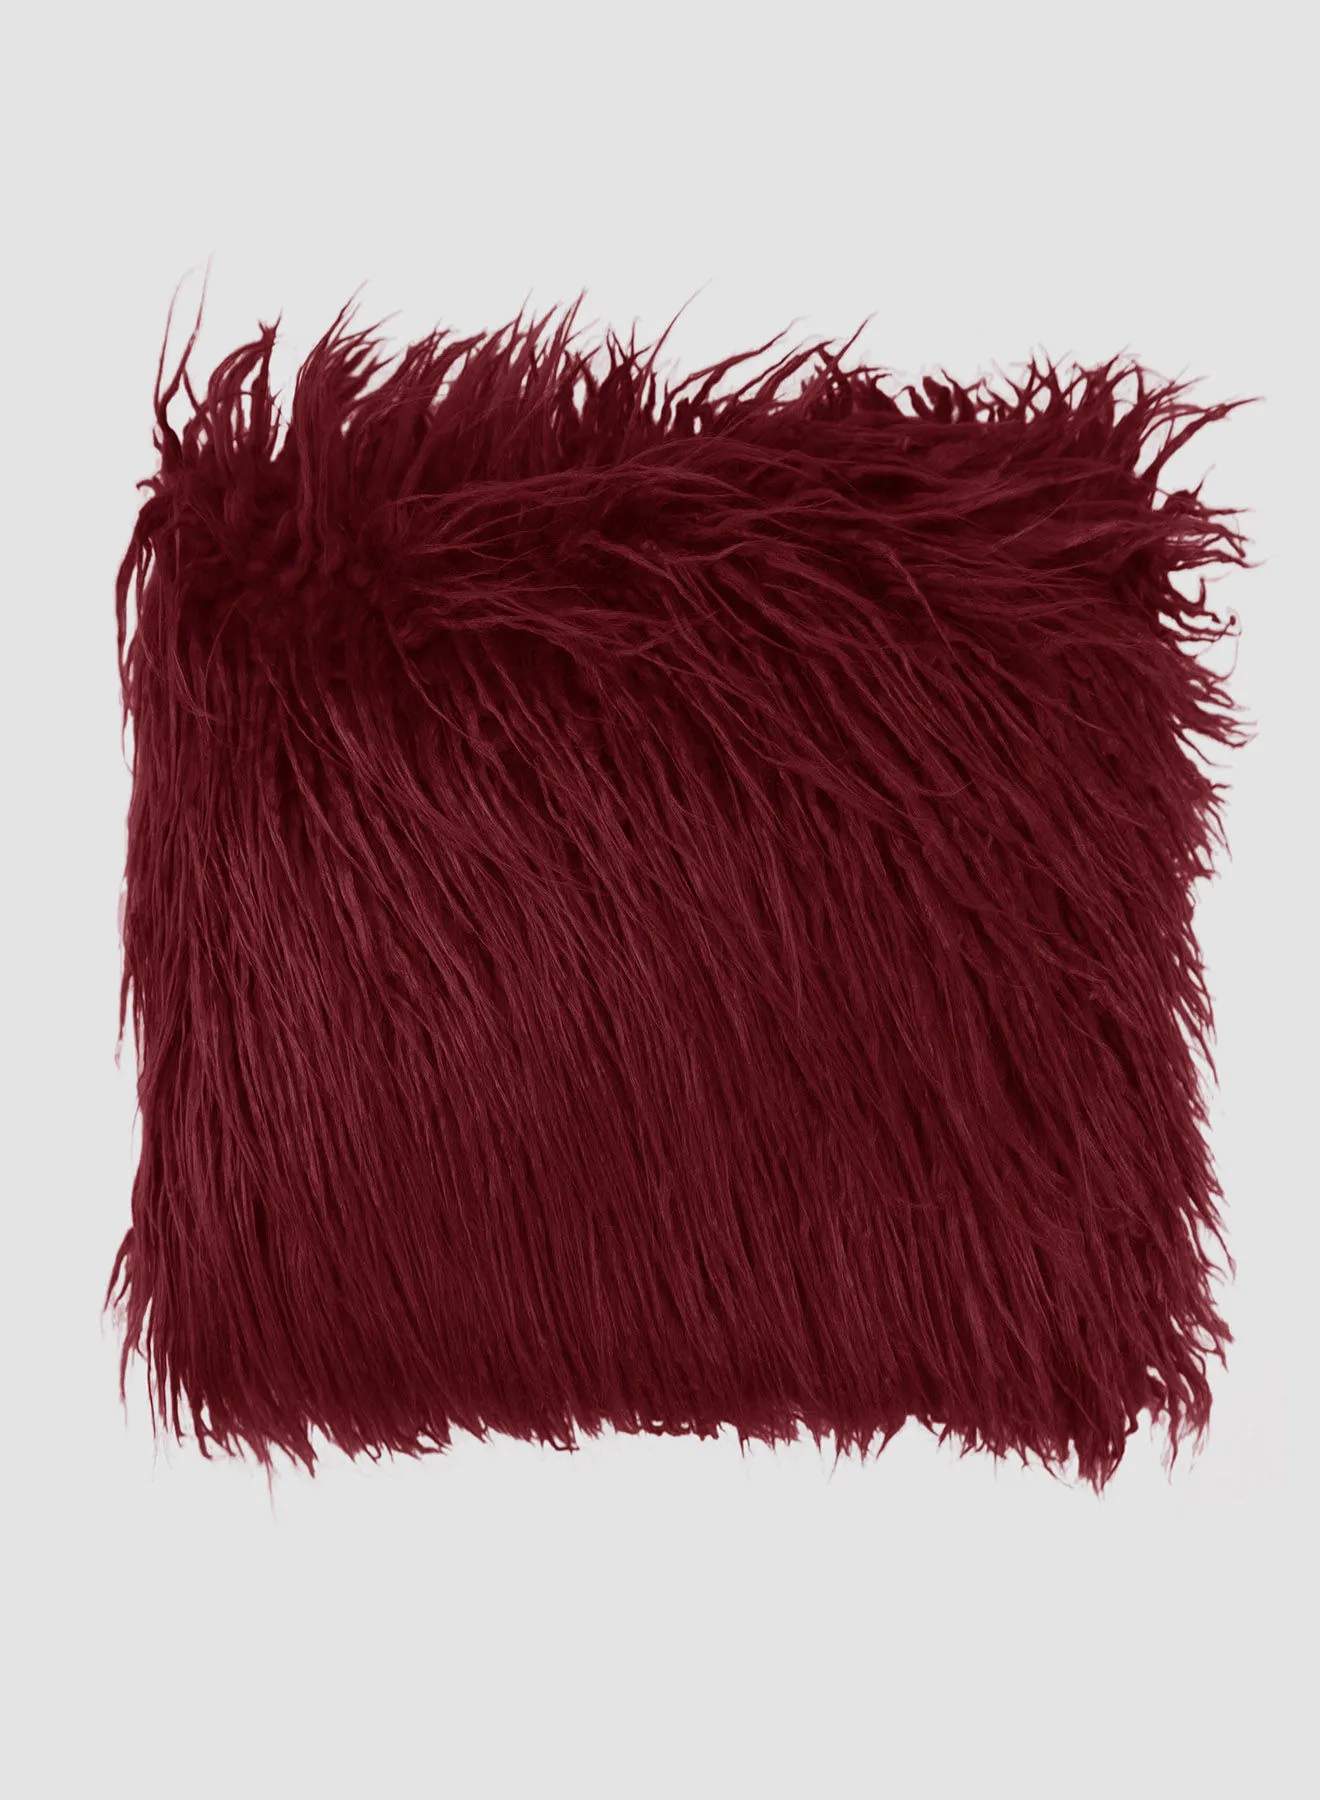 ebb & flow Faux Fur Cushion, Unique Luxury Quality Decor Items for the Perfect Stylish Home Red 50 x 50cm